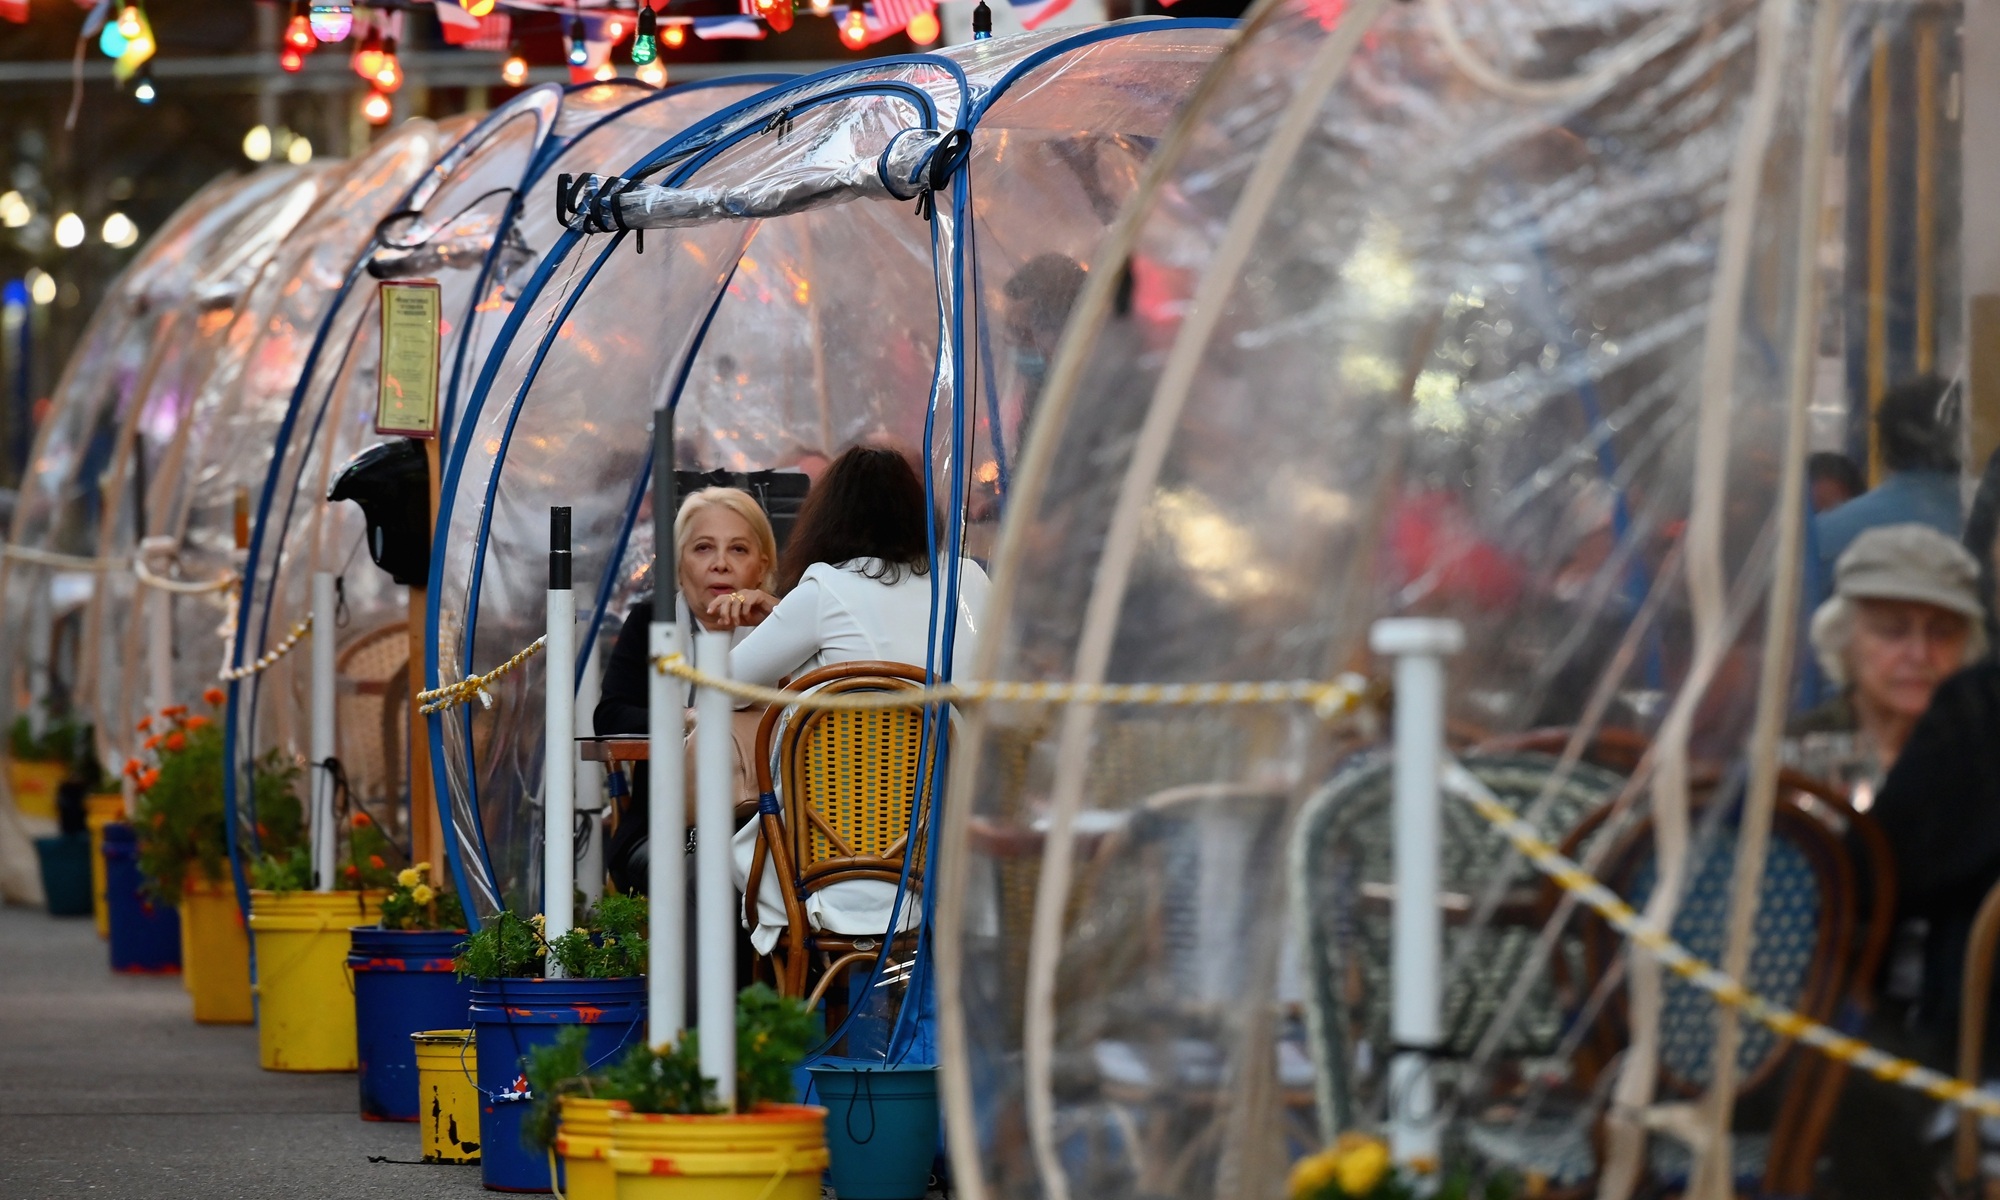 People dine in plastic tents at a restaurant in Manhattan in New York City amid the coronavirus pandemic